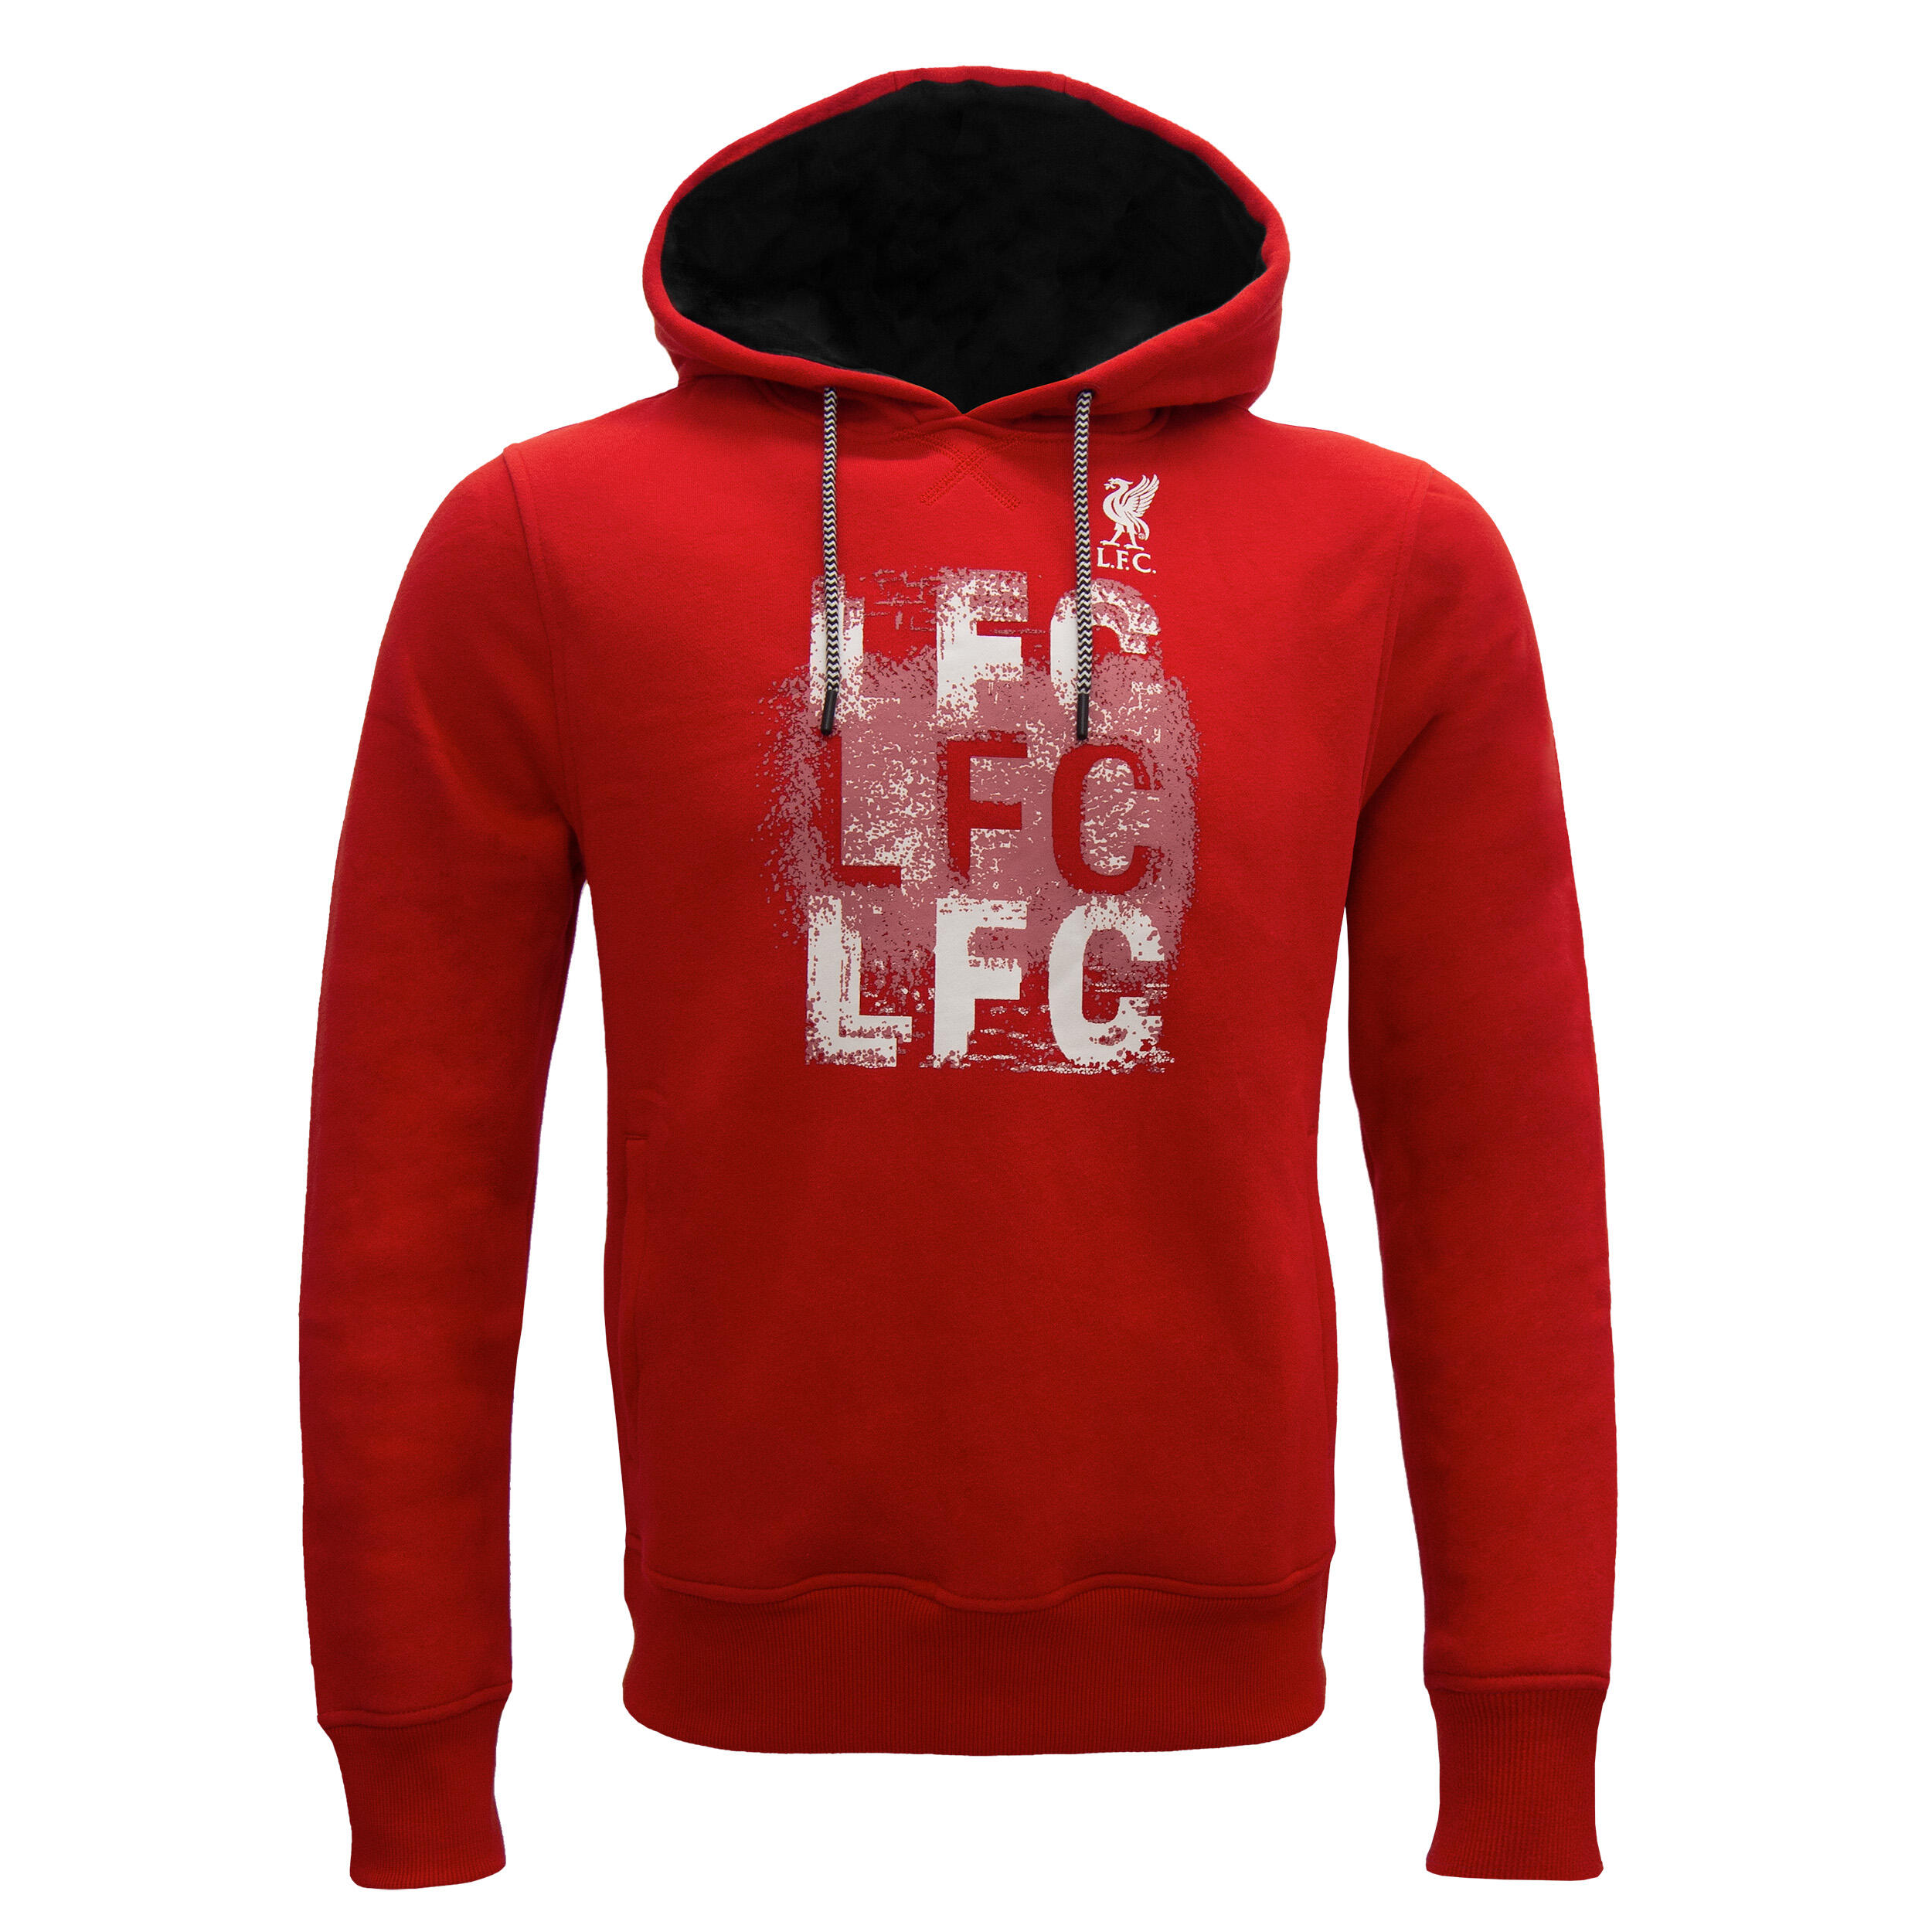 LIVERPOOL FC Liverpool FC Mens Hoody Fleece LFC Graphic OFFICIAL Football Gift